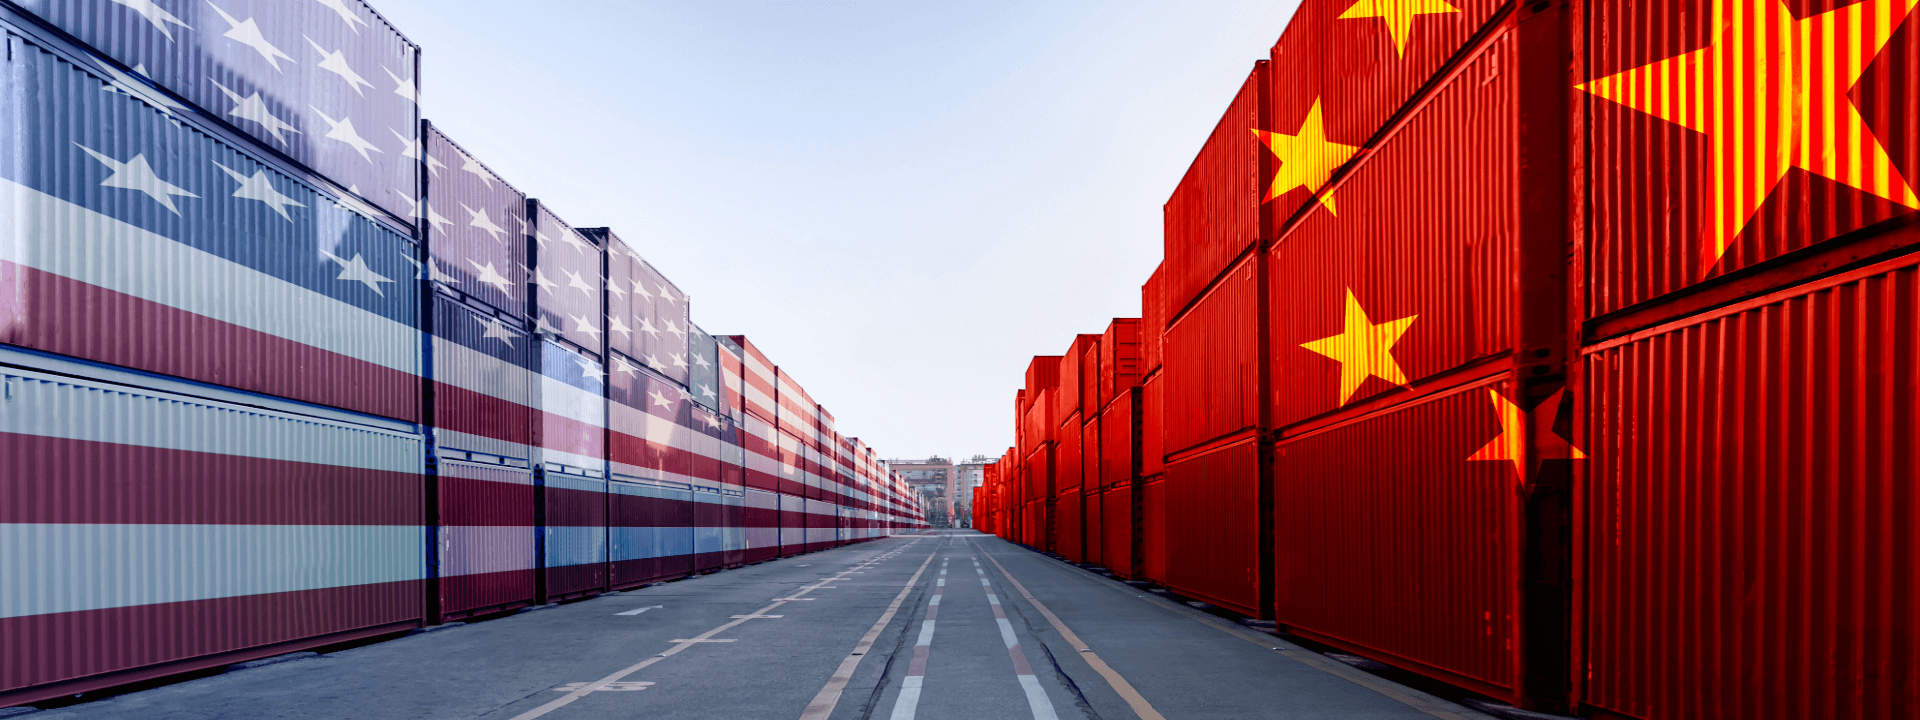 In Depth: Why Biden’s Tariffs Increases Won’t Cause China Much More Pain